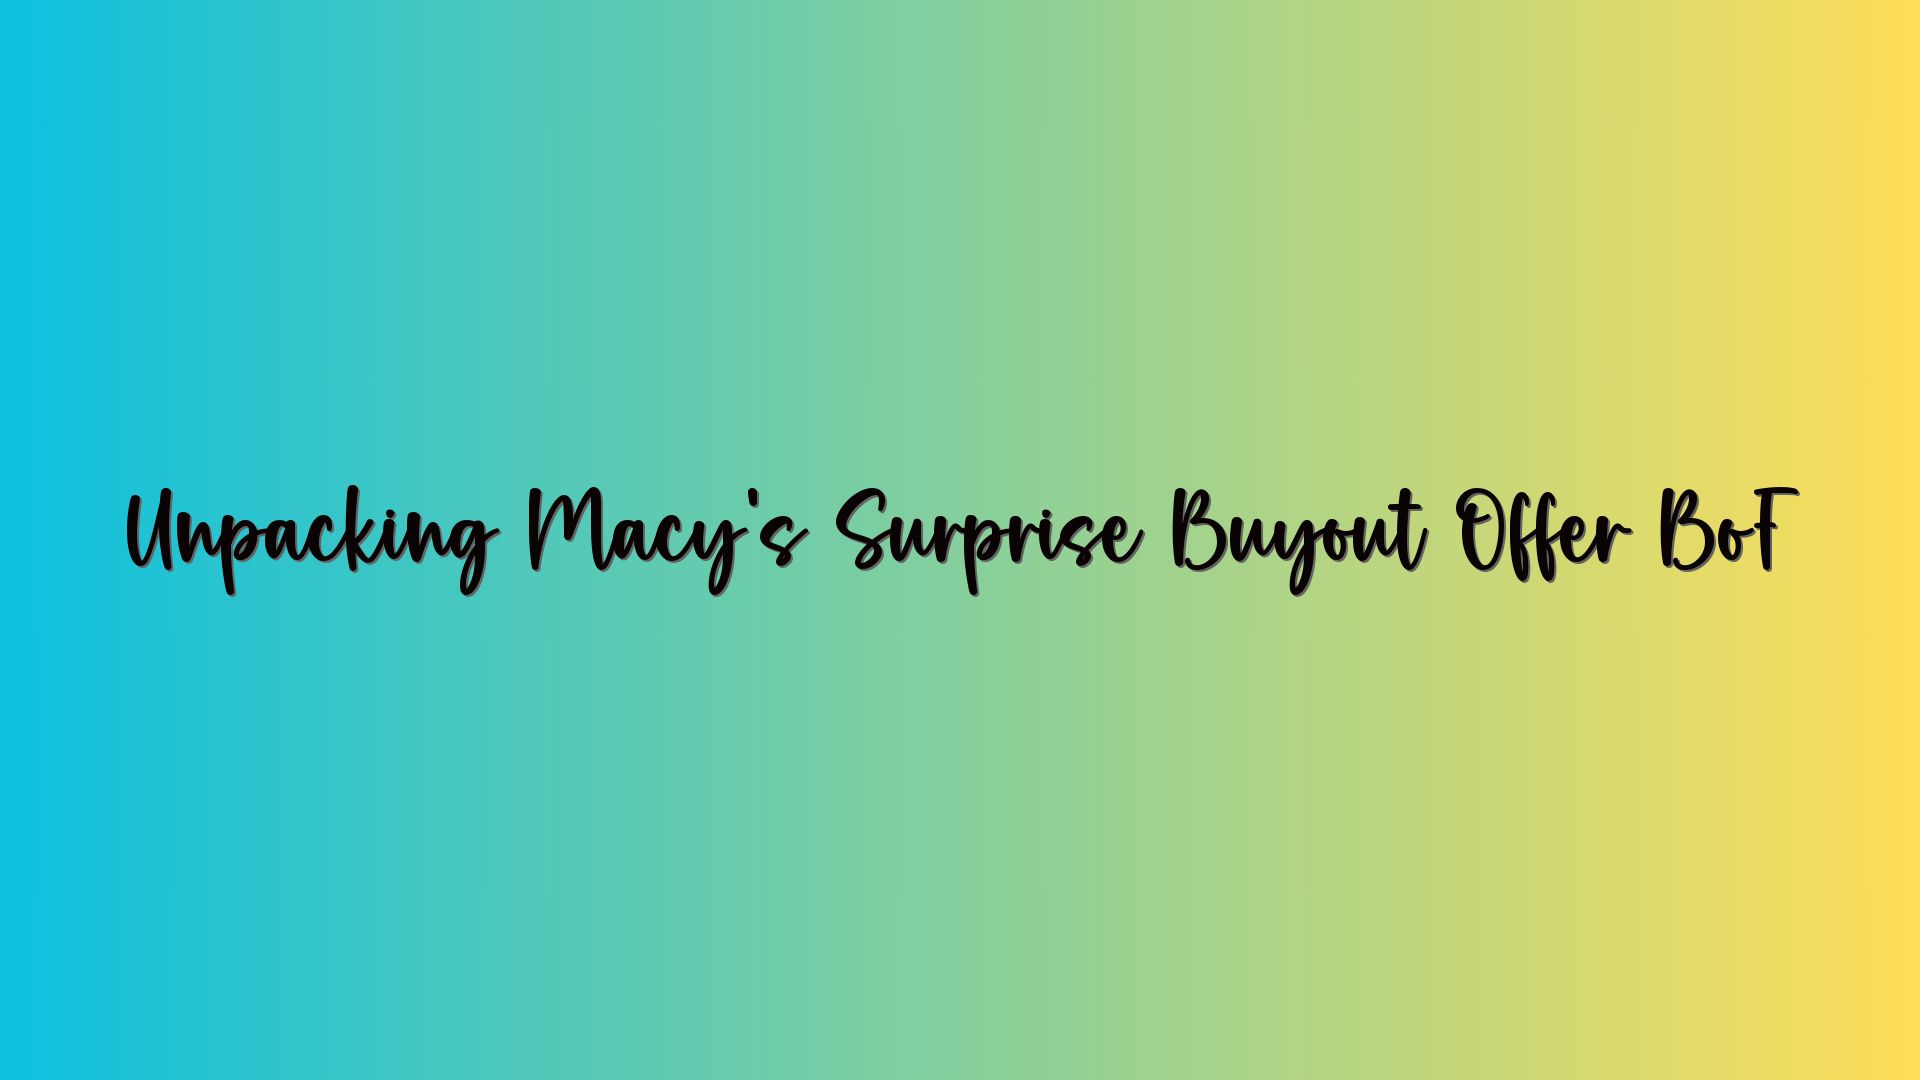 Unpacking Macy’s Surprise Buyout Offer BoF